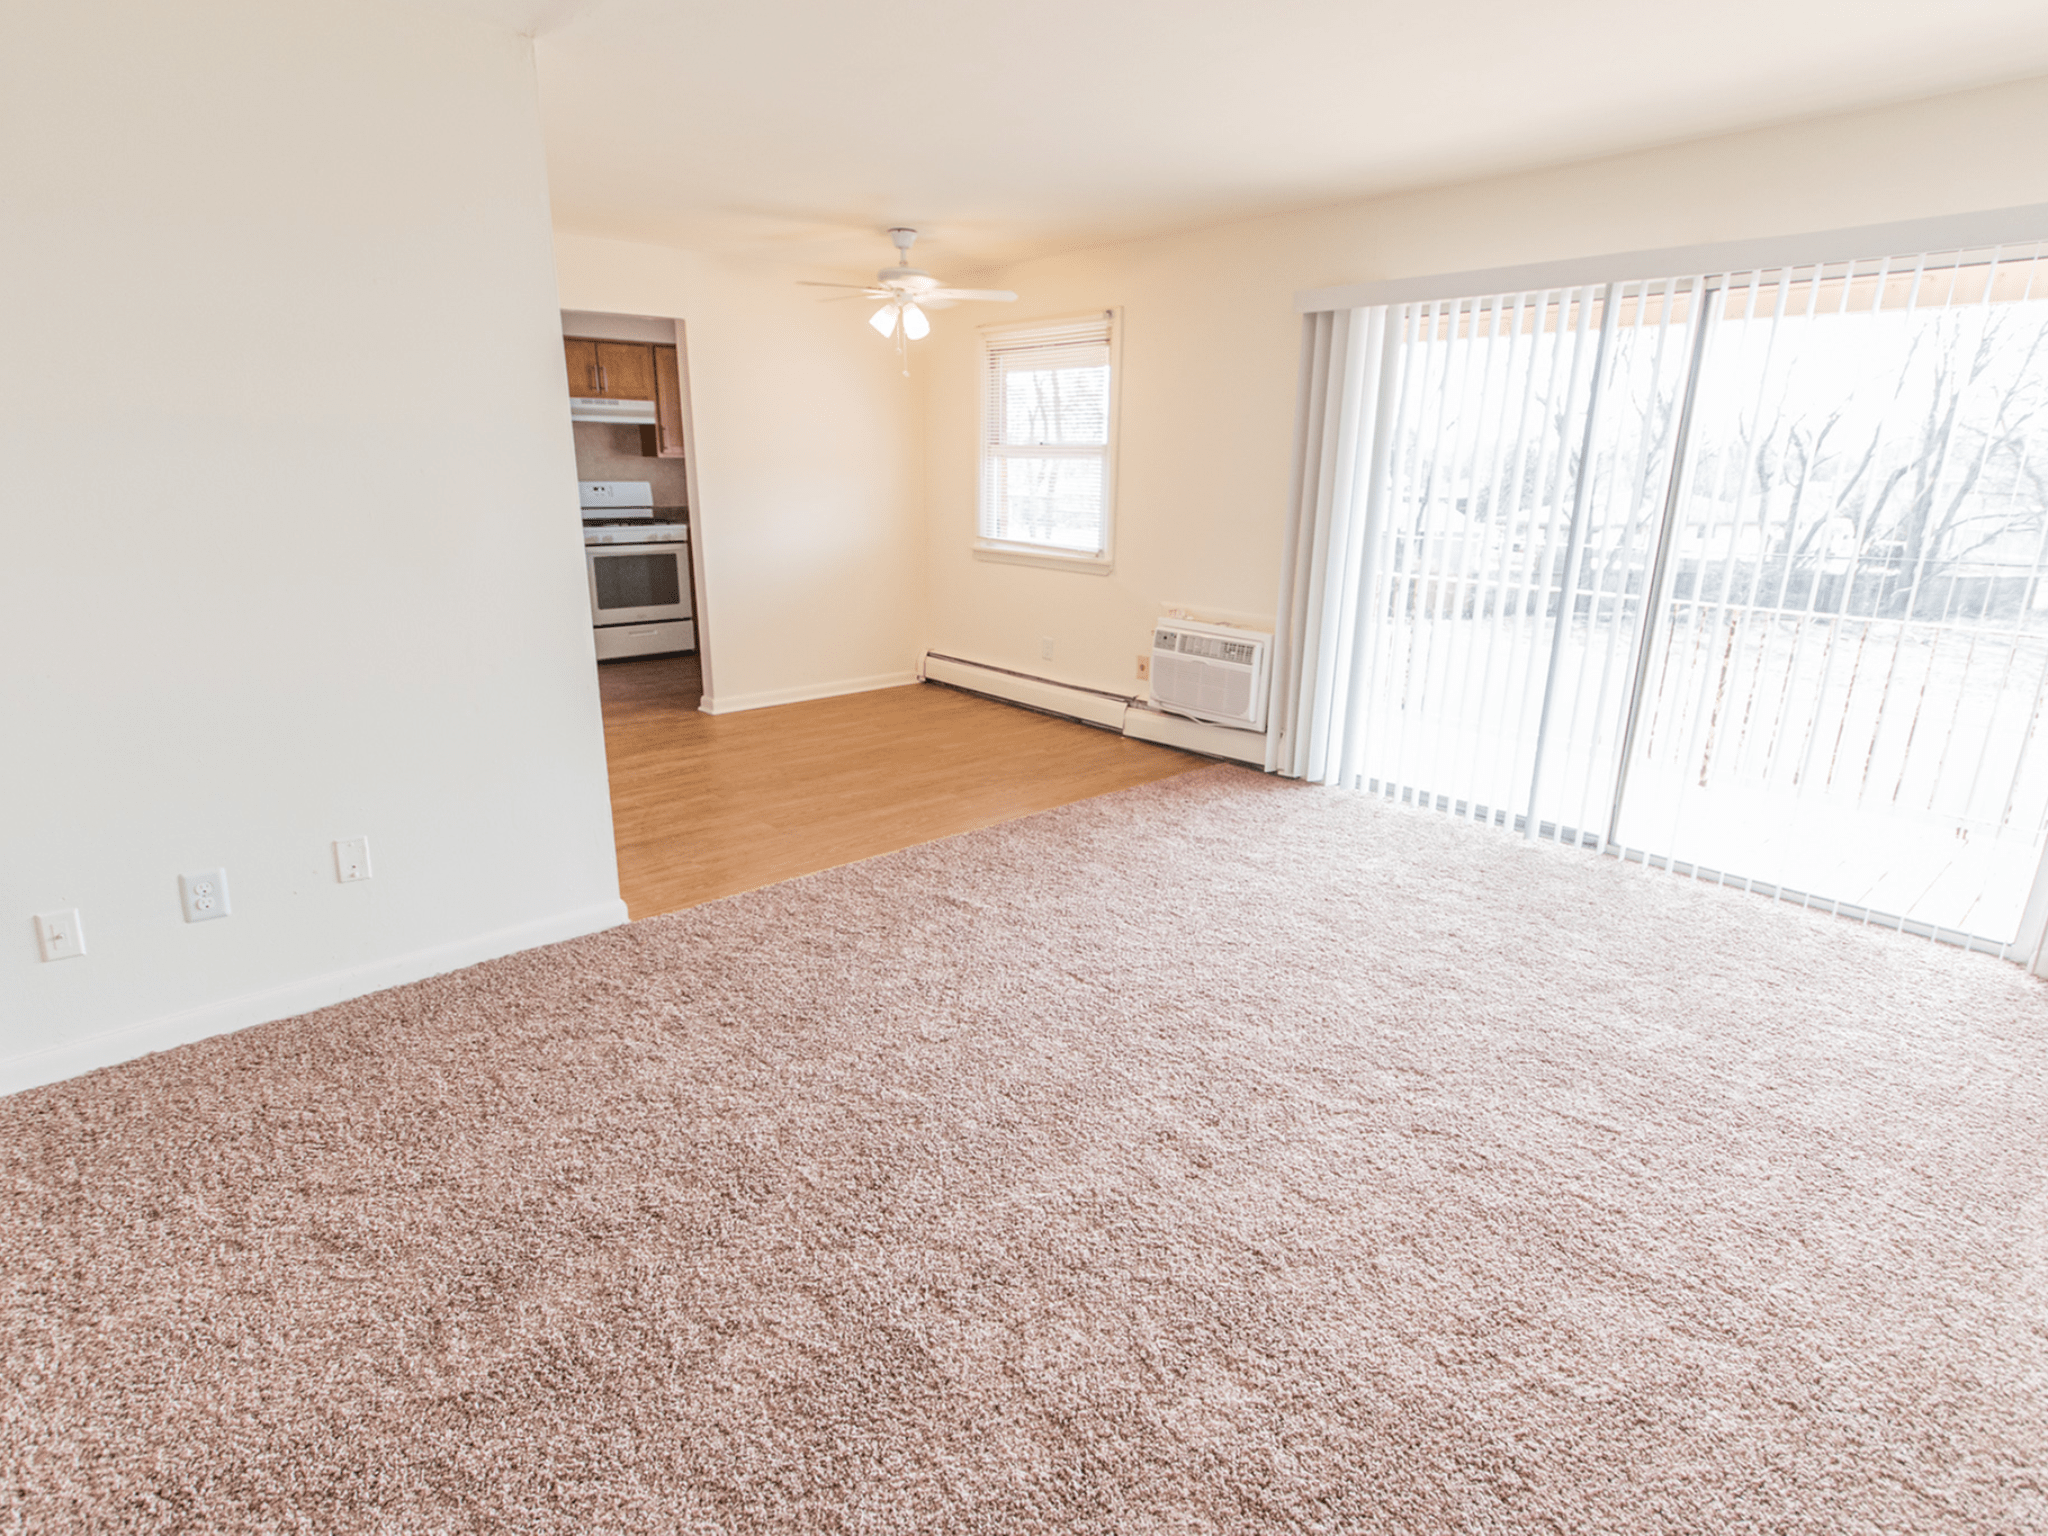 Carpeted floors in living room leading to a balcony at Polo Ridge Apartments